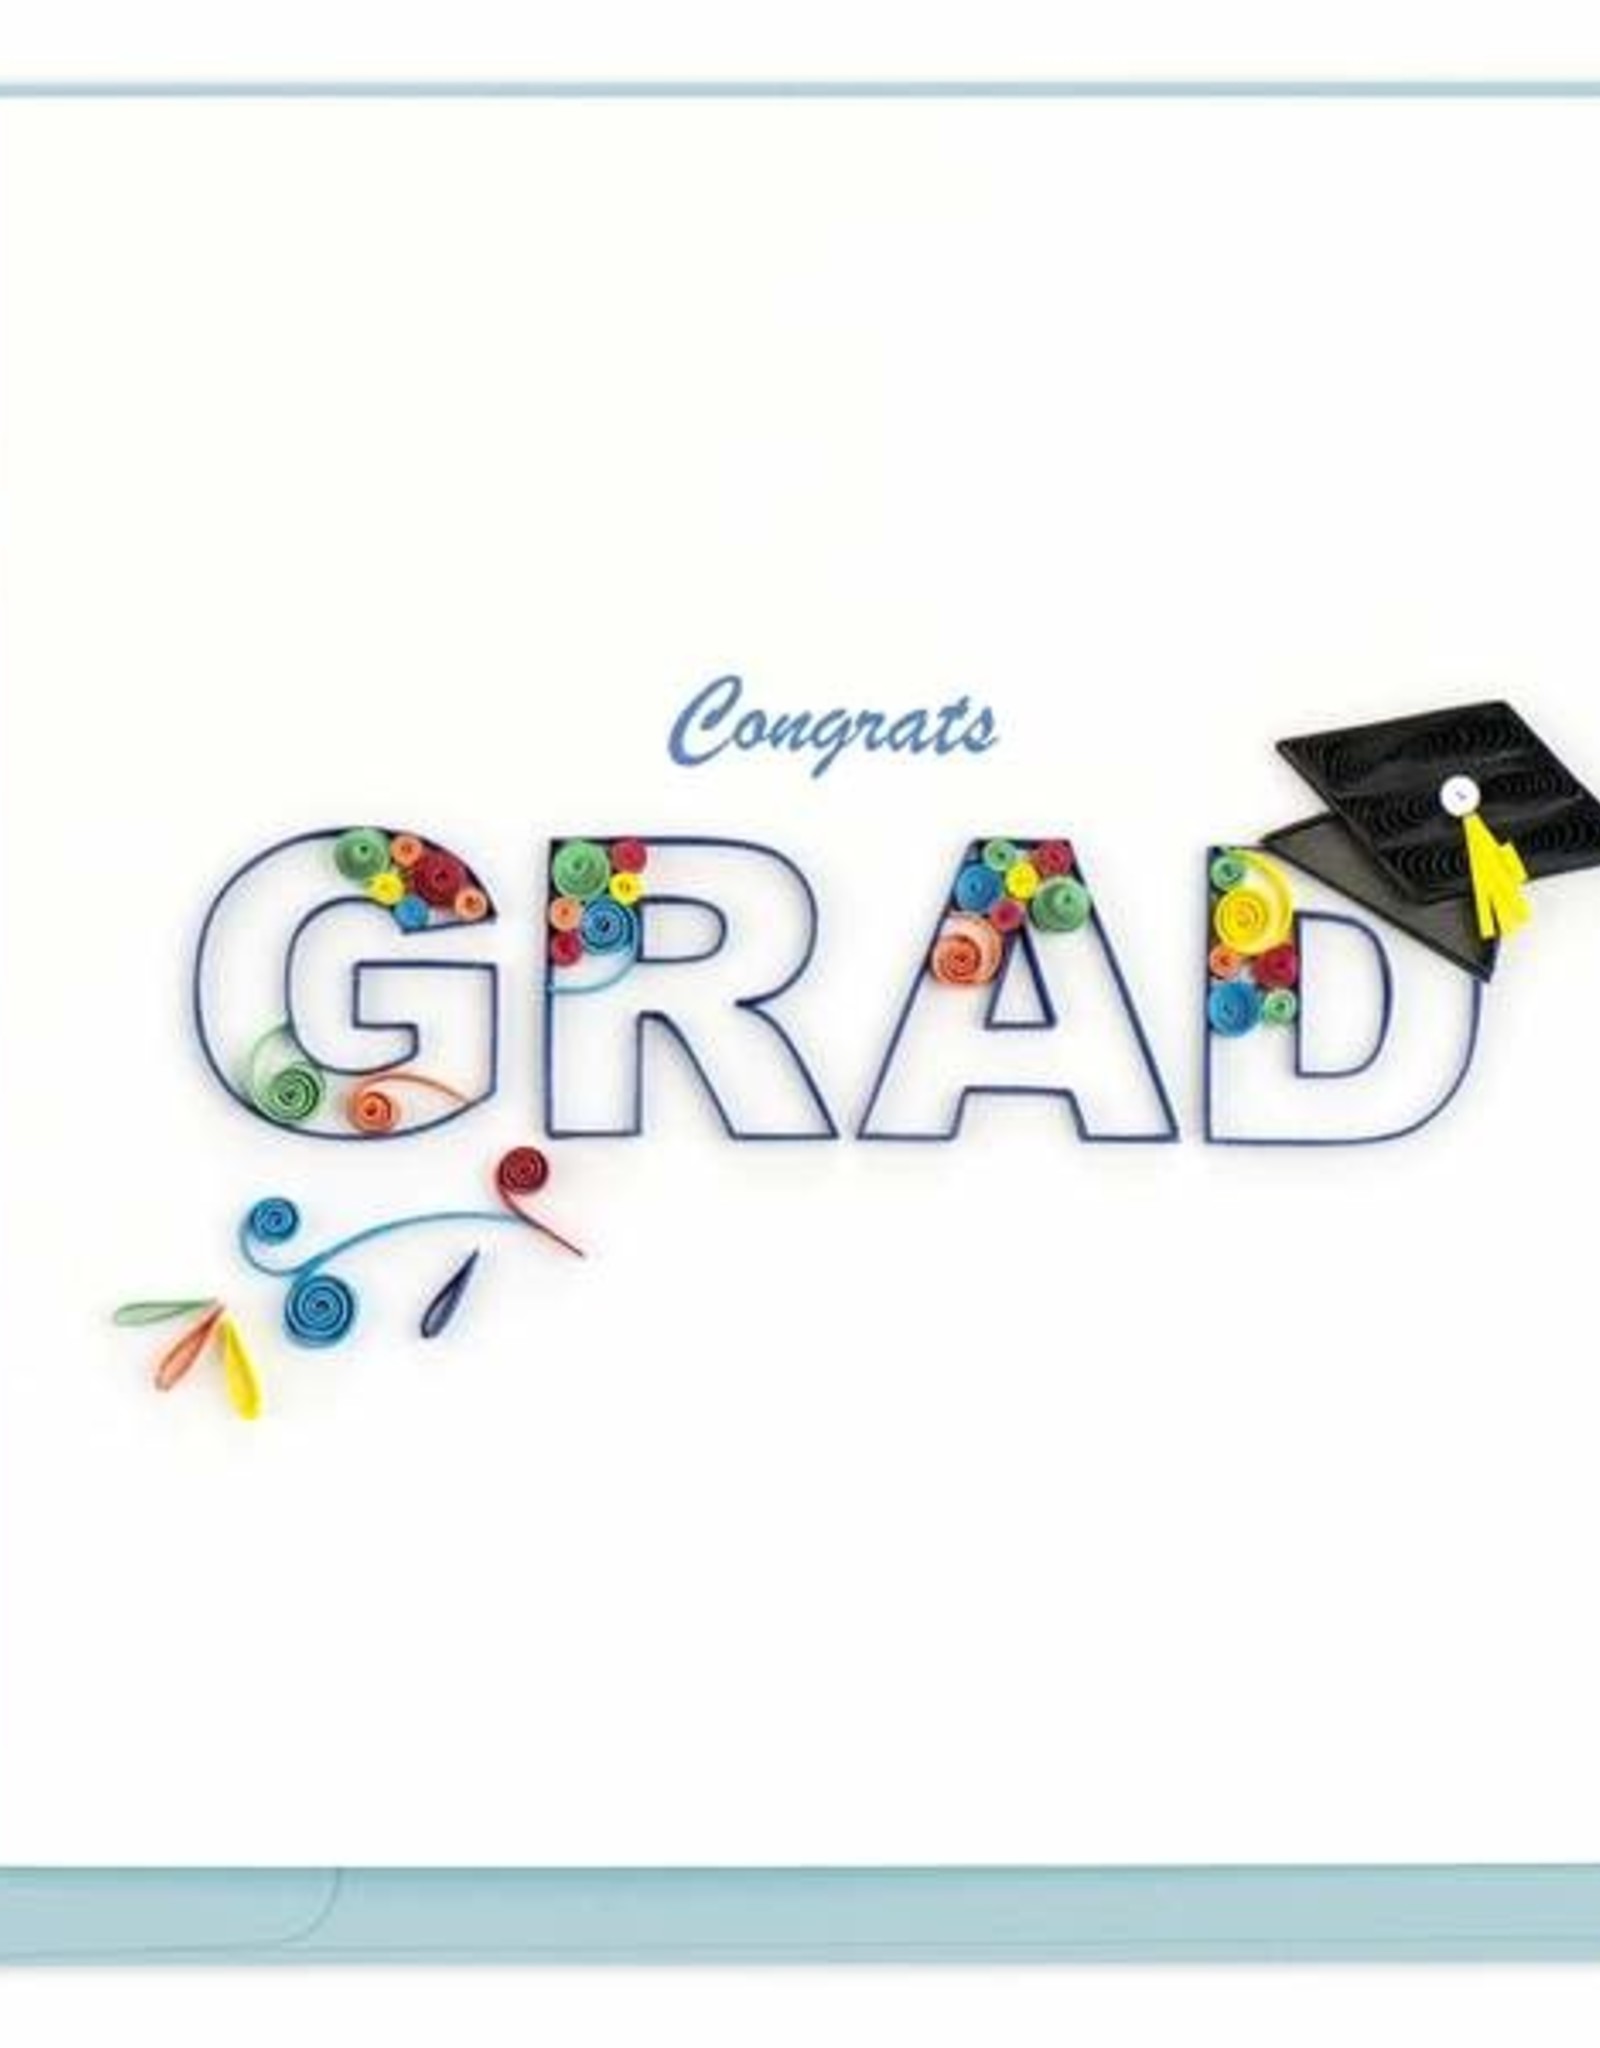 Quilling Card Quilled Congrats Grad Swirl Card